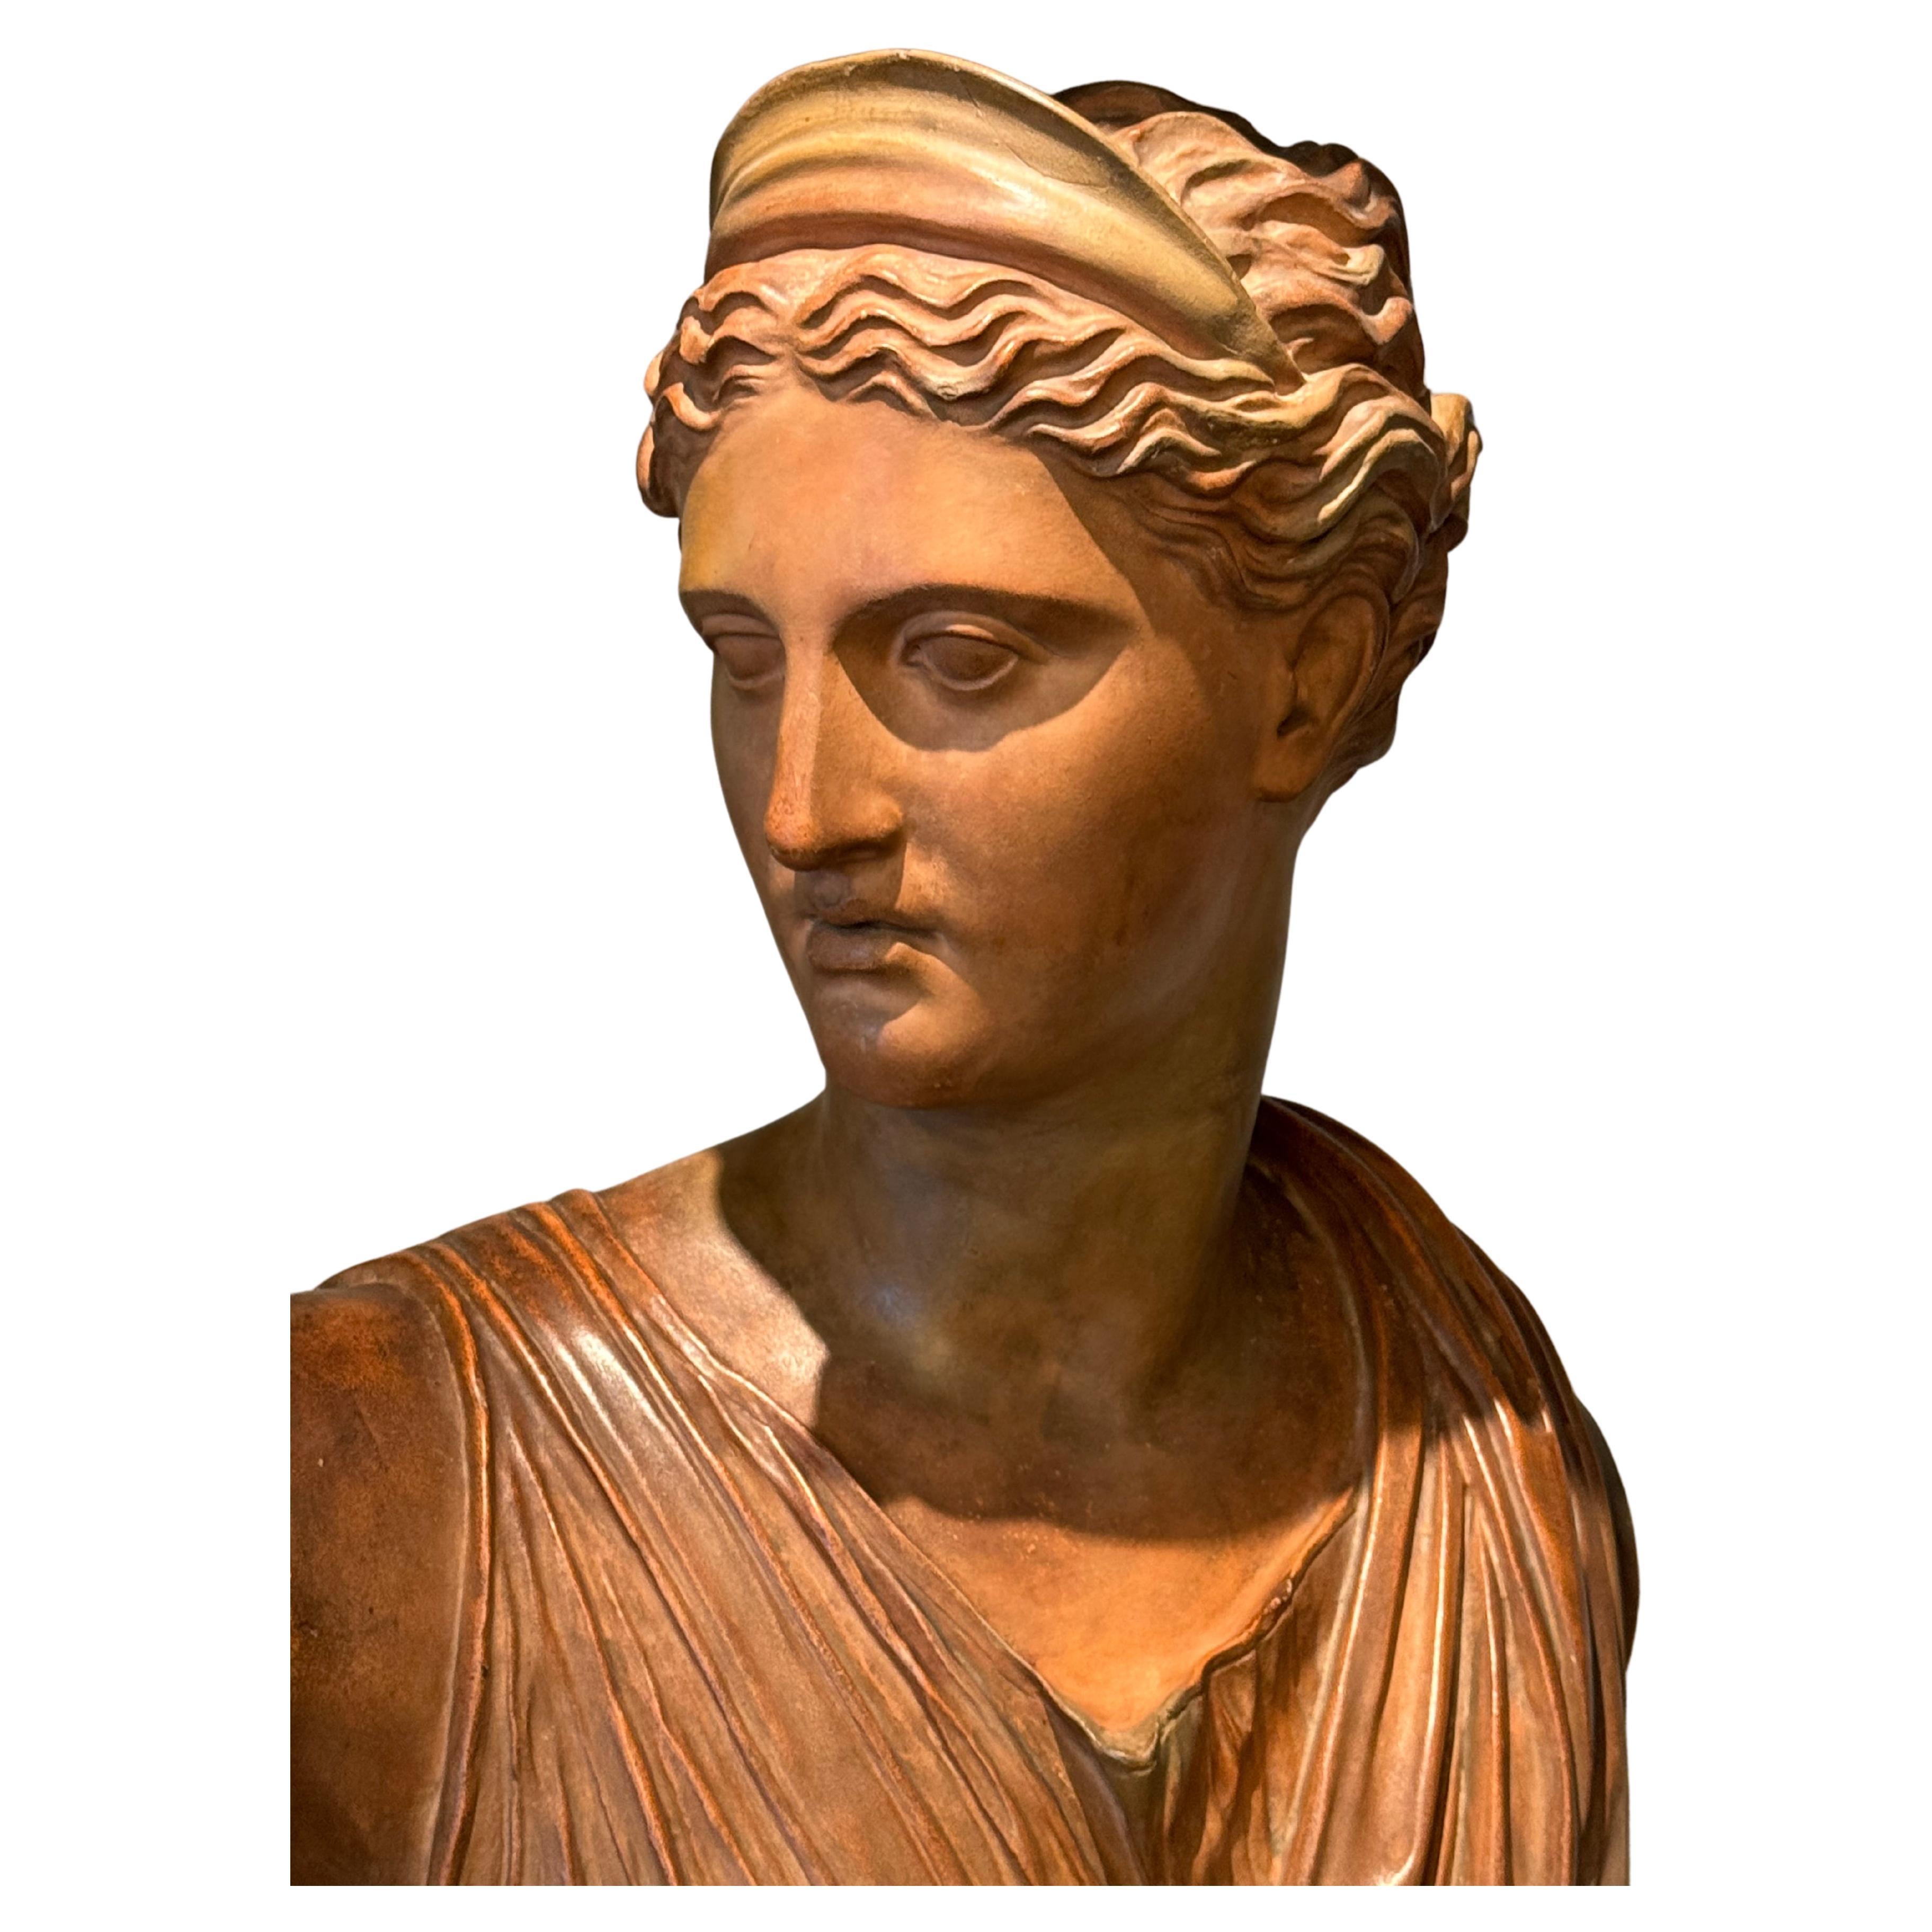 Hand-carved Italianate Terracotta Female Bust, Circa 1870
Sourced from Italy by Martyn Lawrence Bullard
Fitted with Mounted Adjoining Base

